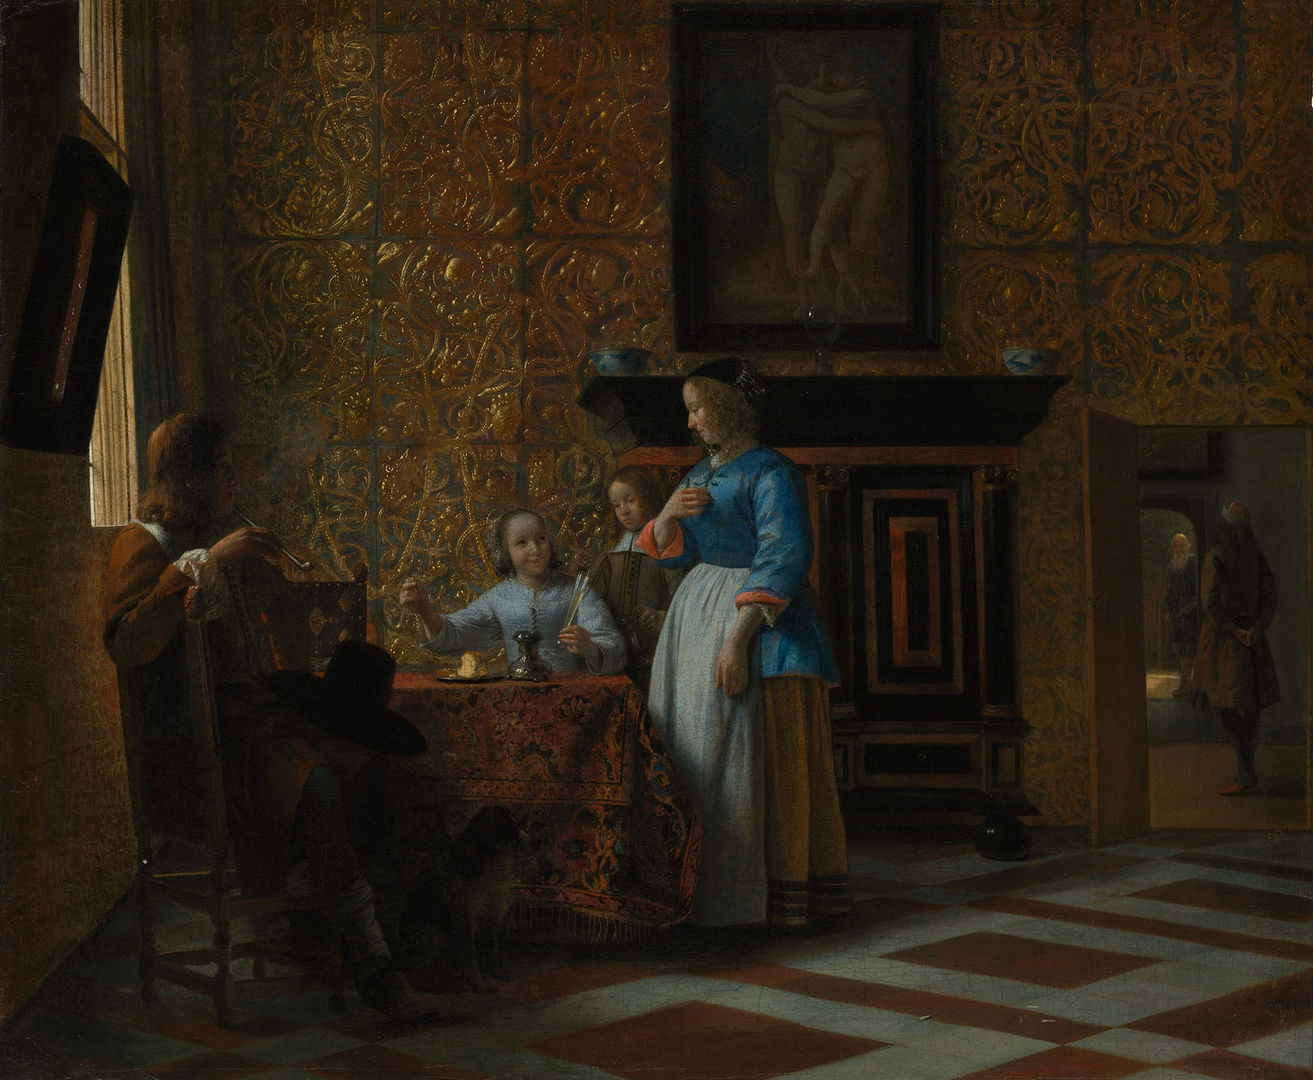 A wealthy family prepares for a meal in a golden room, their elegant table illuminated by a window. Off in the shadows, a beggar is turned away at the door.